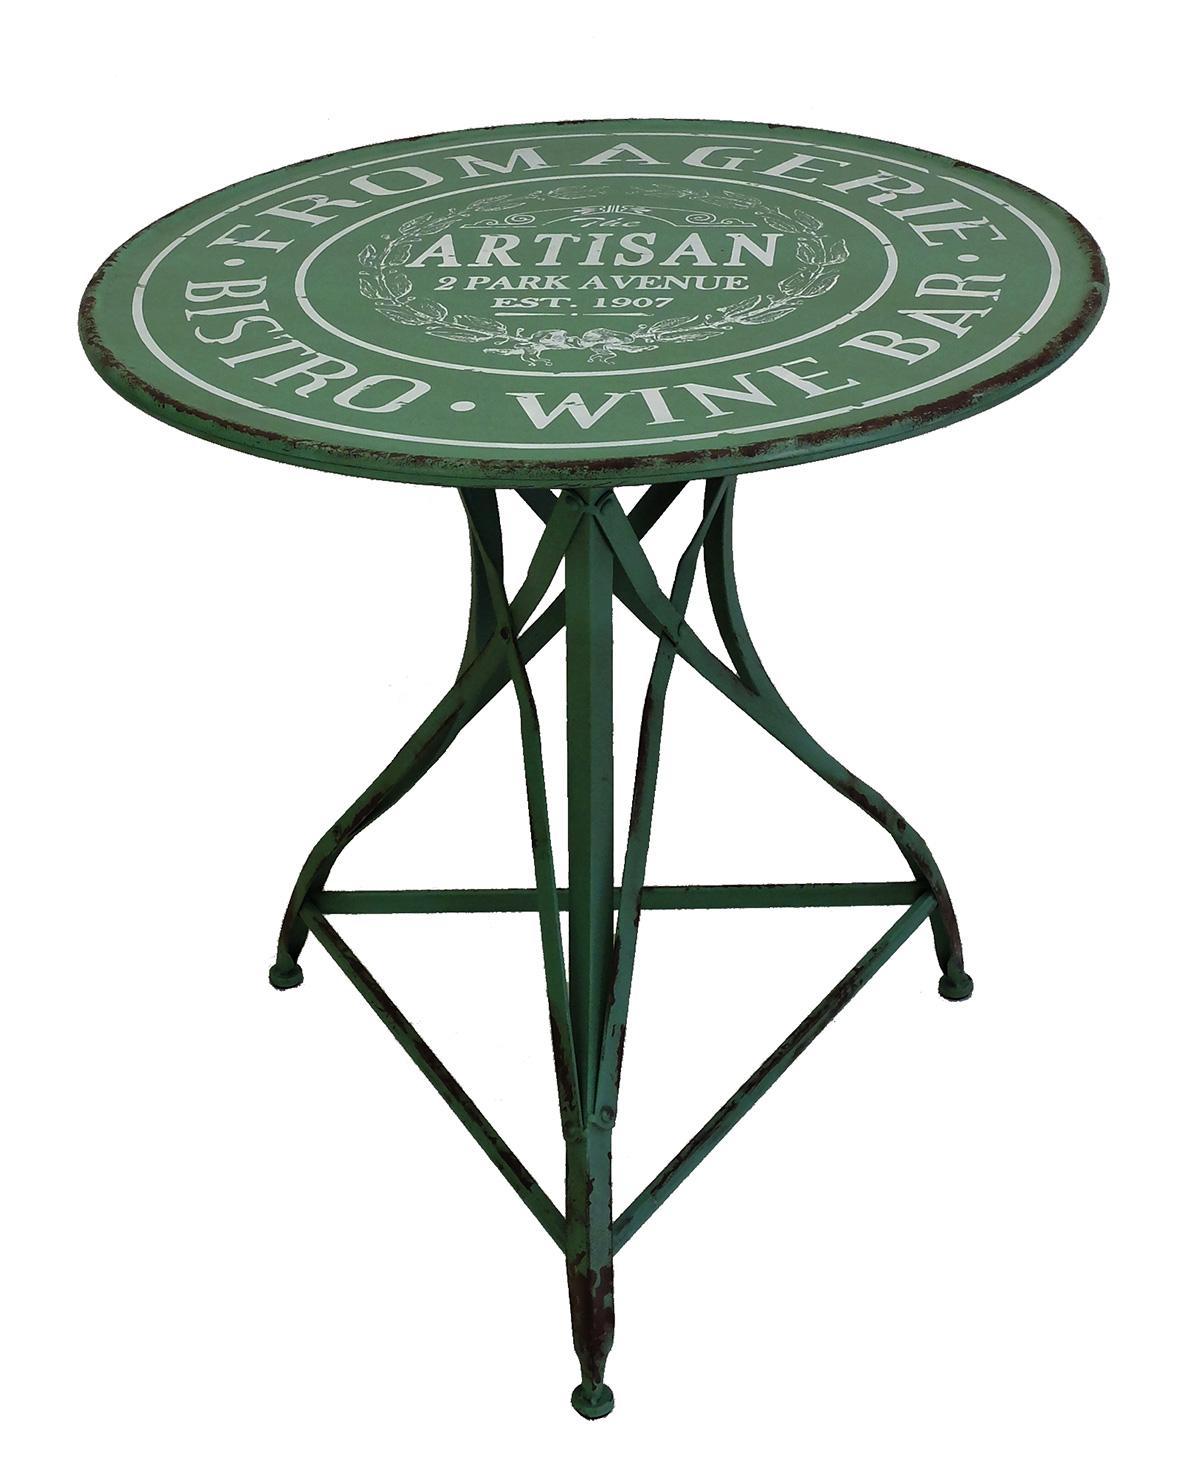 Outdoor set of a round table and two little armchairs for a french bistrot fromagerie and wine bar in New York. The top is made out of pale green painted iron, with the name of the restaurant: The Artisan, 2 Park avenue. France 1930 ca.